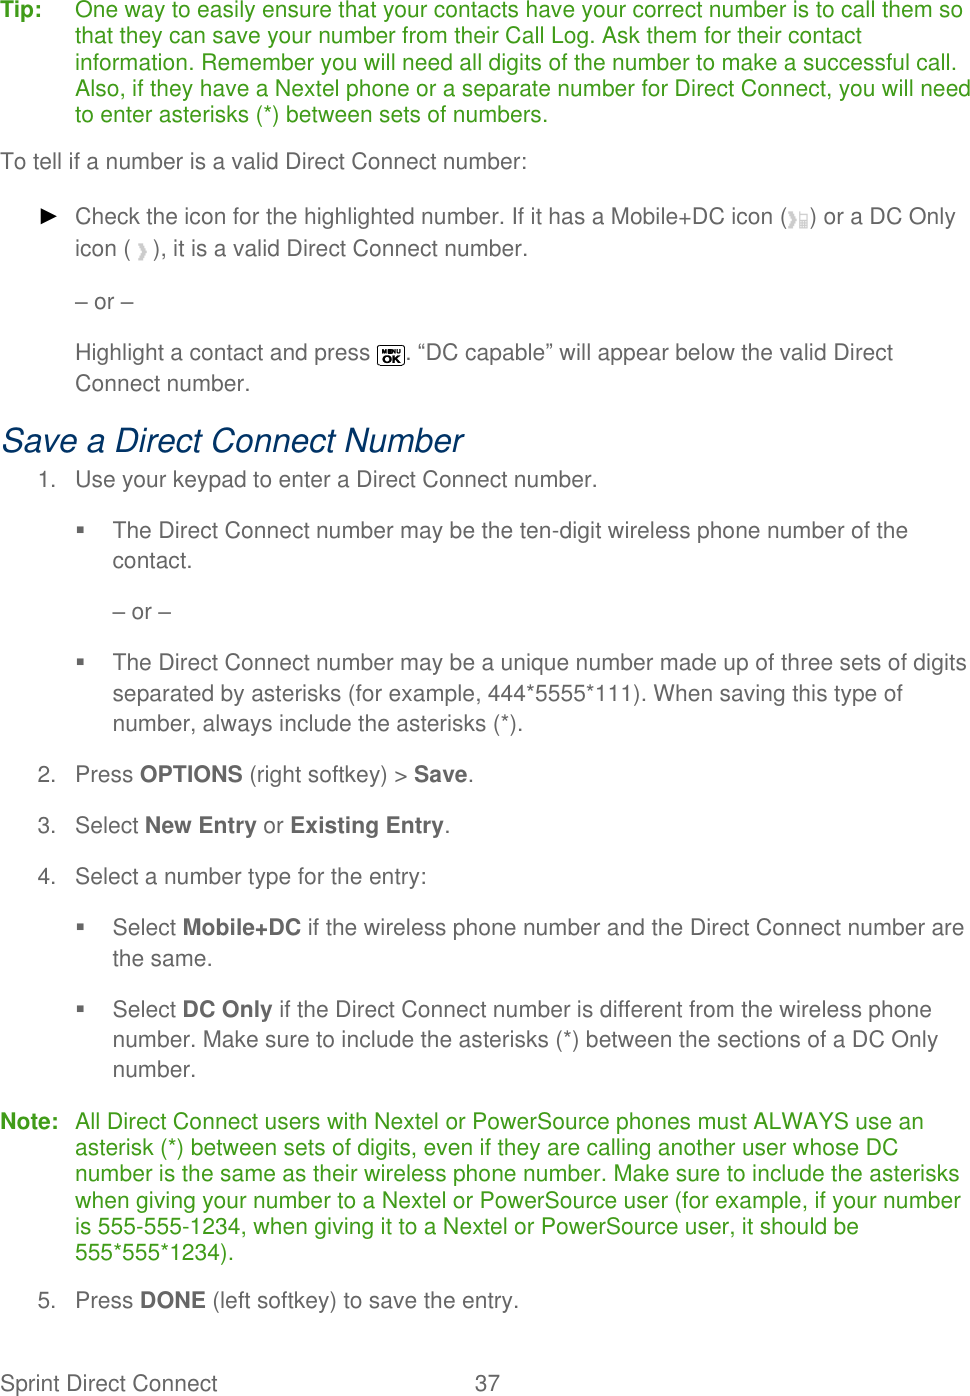  Sprint Direct Connect  37   Tip:  One way to easily ensure that your contacts have your correct number is to call them so that they can save your number from their Call Log. Ask them for their contact information. Remember you will need all digits of the number to make a successful call. Also, if they have a Nextel phone or a separate number for Direct Connect, you will need to enter asterisks (*) between sets of numbers. To tell if a number is a valid Direct Connect number: ► Check the icon for the highlighted number. If it has a Mobile+DC icon ( ) or a DC Only icon ( ), it is a valid Direct Connect number. – or – Highlight a contact and press  . ―DC capable‖ will appear below the valid Direct Connect number. Save a Direct Connect Number 1.  Use your keypad to enter a Direct Connect number.   The Direct Connect number may be the ten-digit wireless phone number of the contact. – or –   The Direct Connect number may be a unique number made up of three sets of digits separated by asterisks (for example, 444*5555*111). When saving this type of number, always include the asterisks (*). 2.  Press OPTIONS (right softkey) &gt; Save. 3.  Select New Entry or Existing Entry. 4.  Select a number type for the entry:   Select Mobile+DC if the wireless phone number and the Direct Connect number are the same.   Select DC Only if the Direct Connect number is different from the wireless phone number. Make sure to include the asterisks (*) between the sections of a DC Only number. Note:  All Direct Connect users with Nextel or PowerSource phones must ALWAYS use an asterisk (*) between sets of digits, even if they are calling another user whose DC number is the same as their wireless phone number. Make sure to include the asterisks when giving your number to a Nextel or PowerSource user (for example, if your number is 555-555-1234, when giving it to a Nextel or PowerSource user, it should be 555*555*1234). 5.  Press DONE (left softkey) to save the entry. 